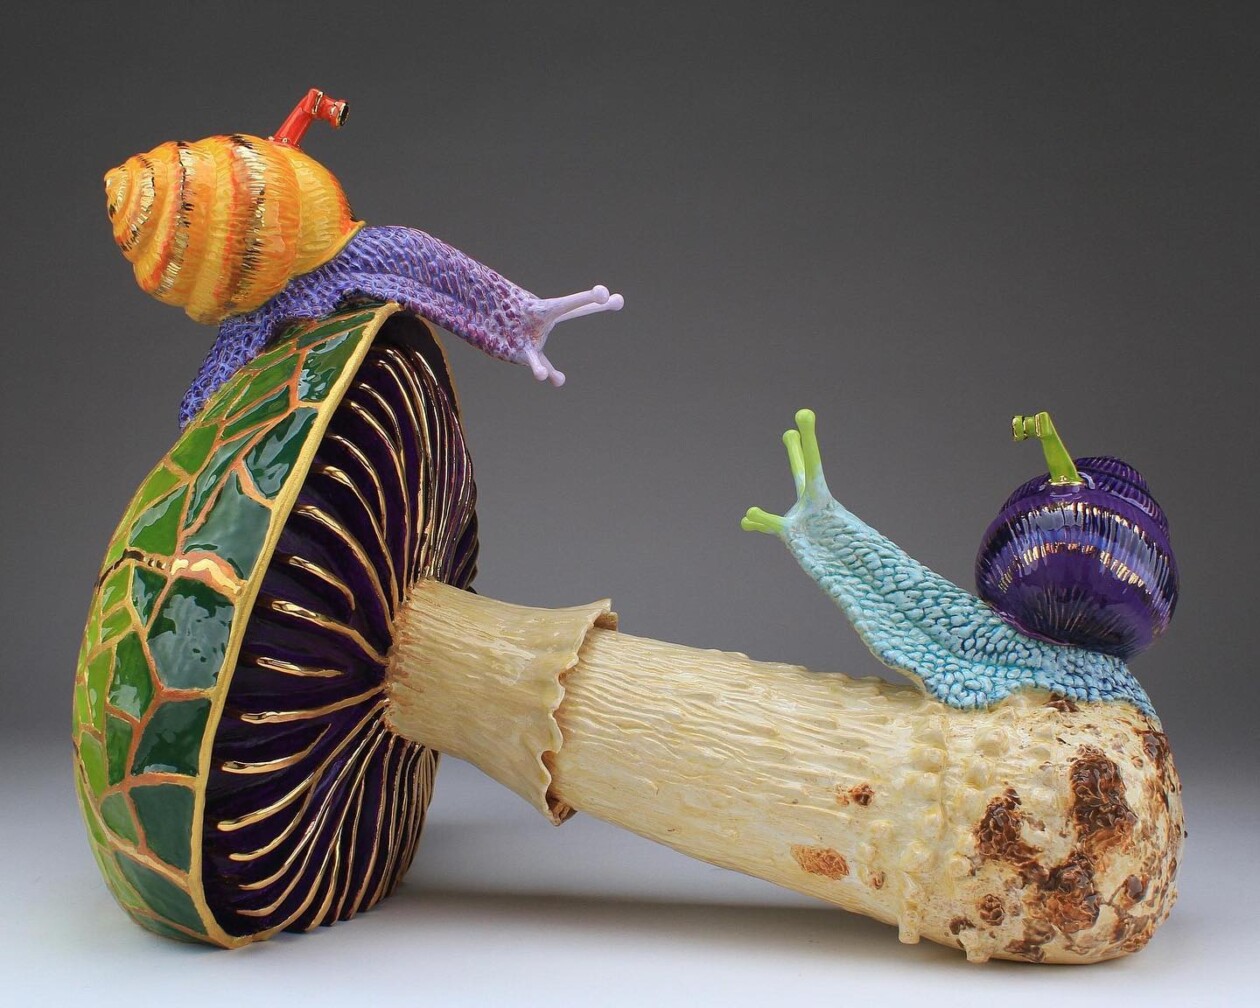 When Animals Dream, The Whimsical Sculptures Of Alan Waring (24)